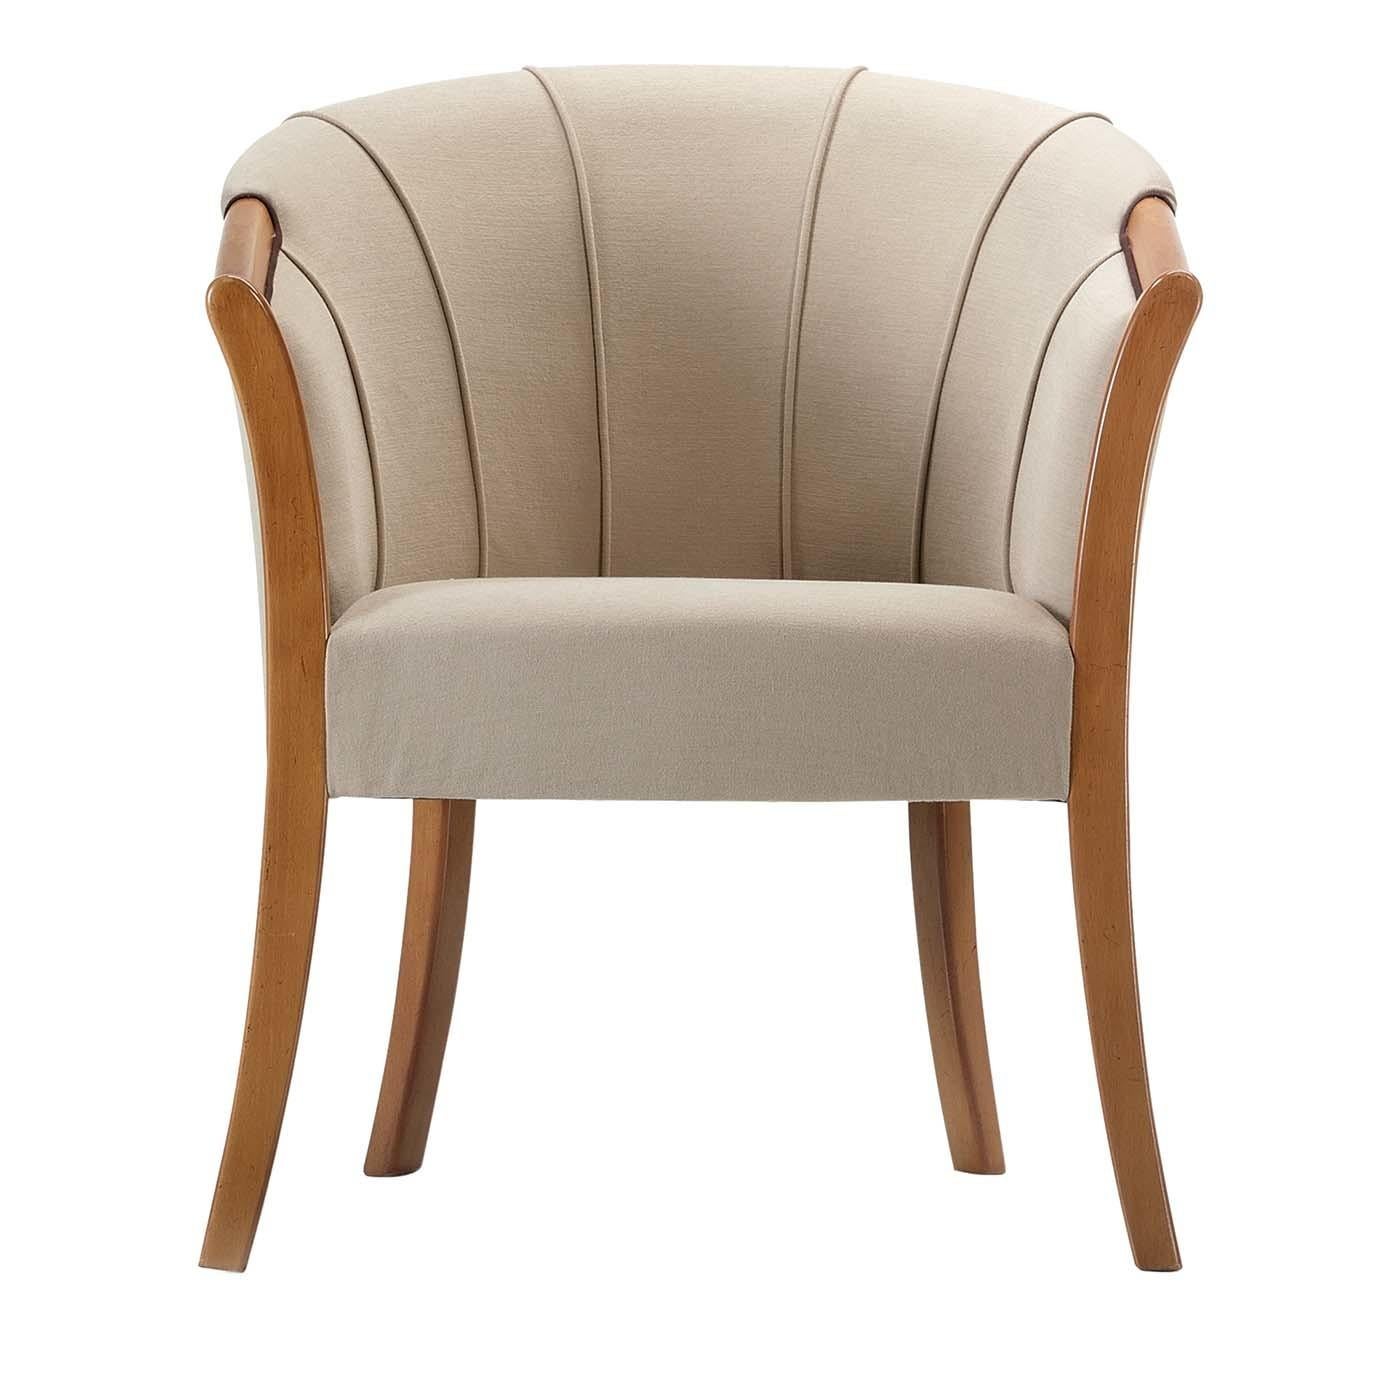 Custom made by skilled artisans, this lovely armchair combines Classic and contemporary design for a luxurious style. Shown here in beige with wooden legs, it can be personalized according to the customer's needs. The modern and elegant design makes